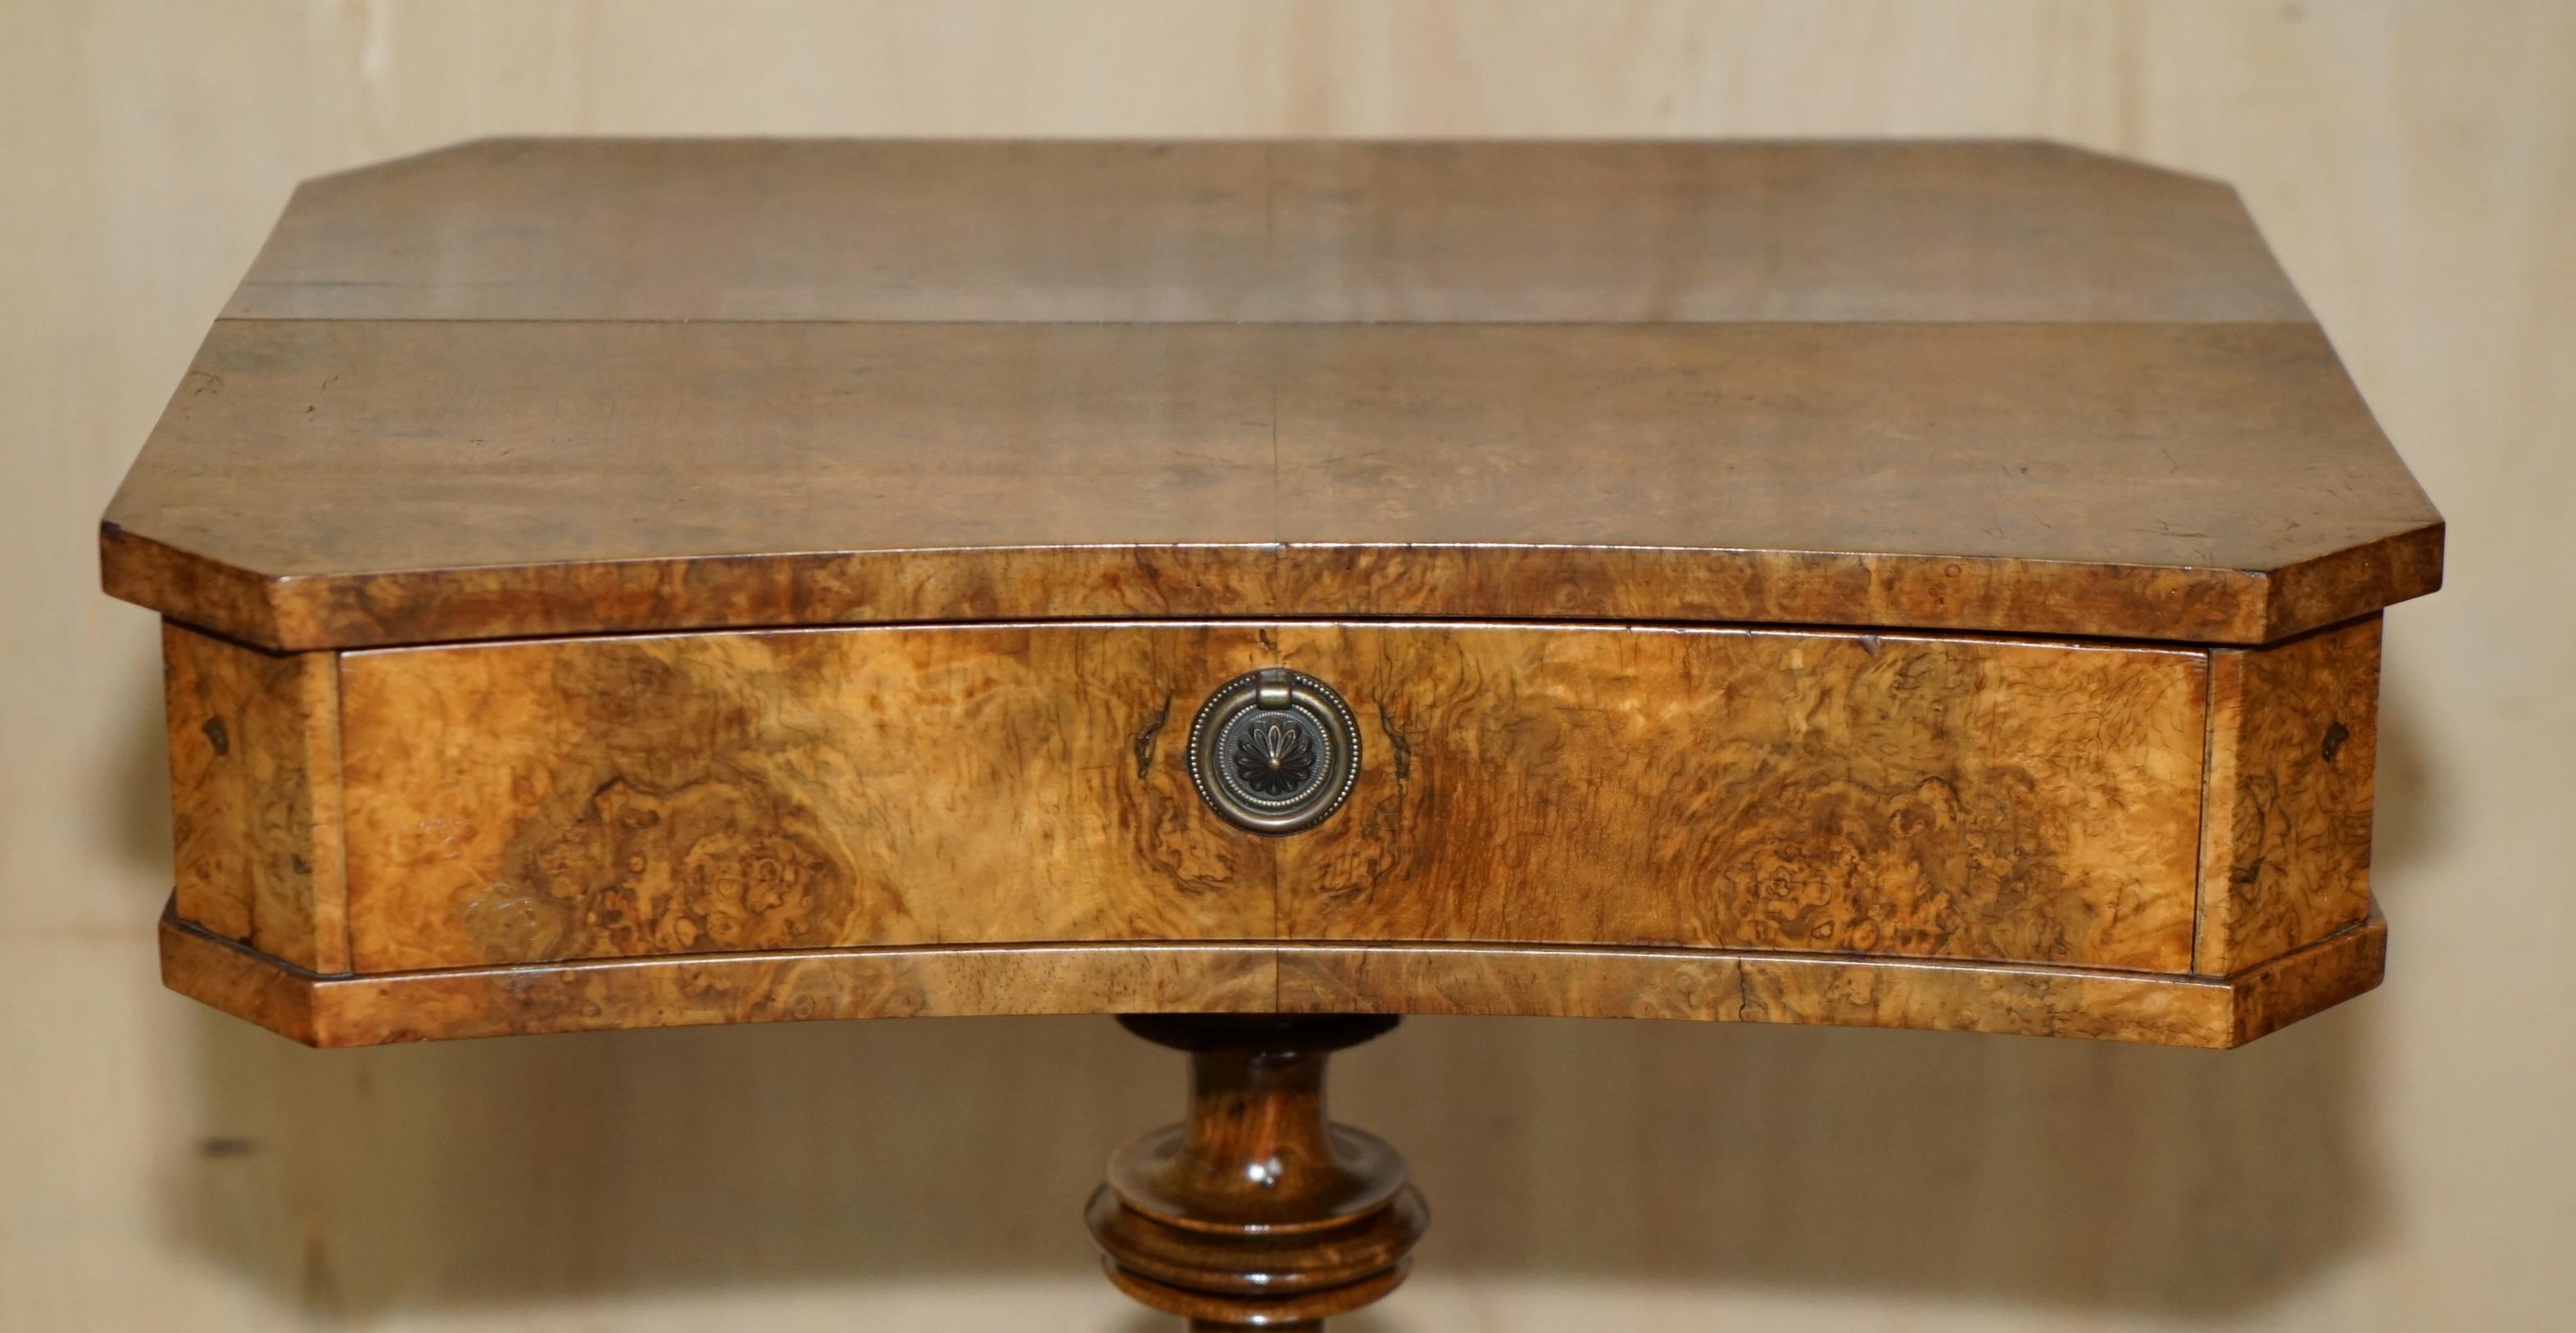 EXQUISITE QUALITY WILLIAM IV CIRCA 1830 BURR WALNUT SiDE END WORK SEWING TABLE For Sale 2